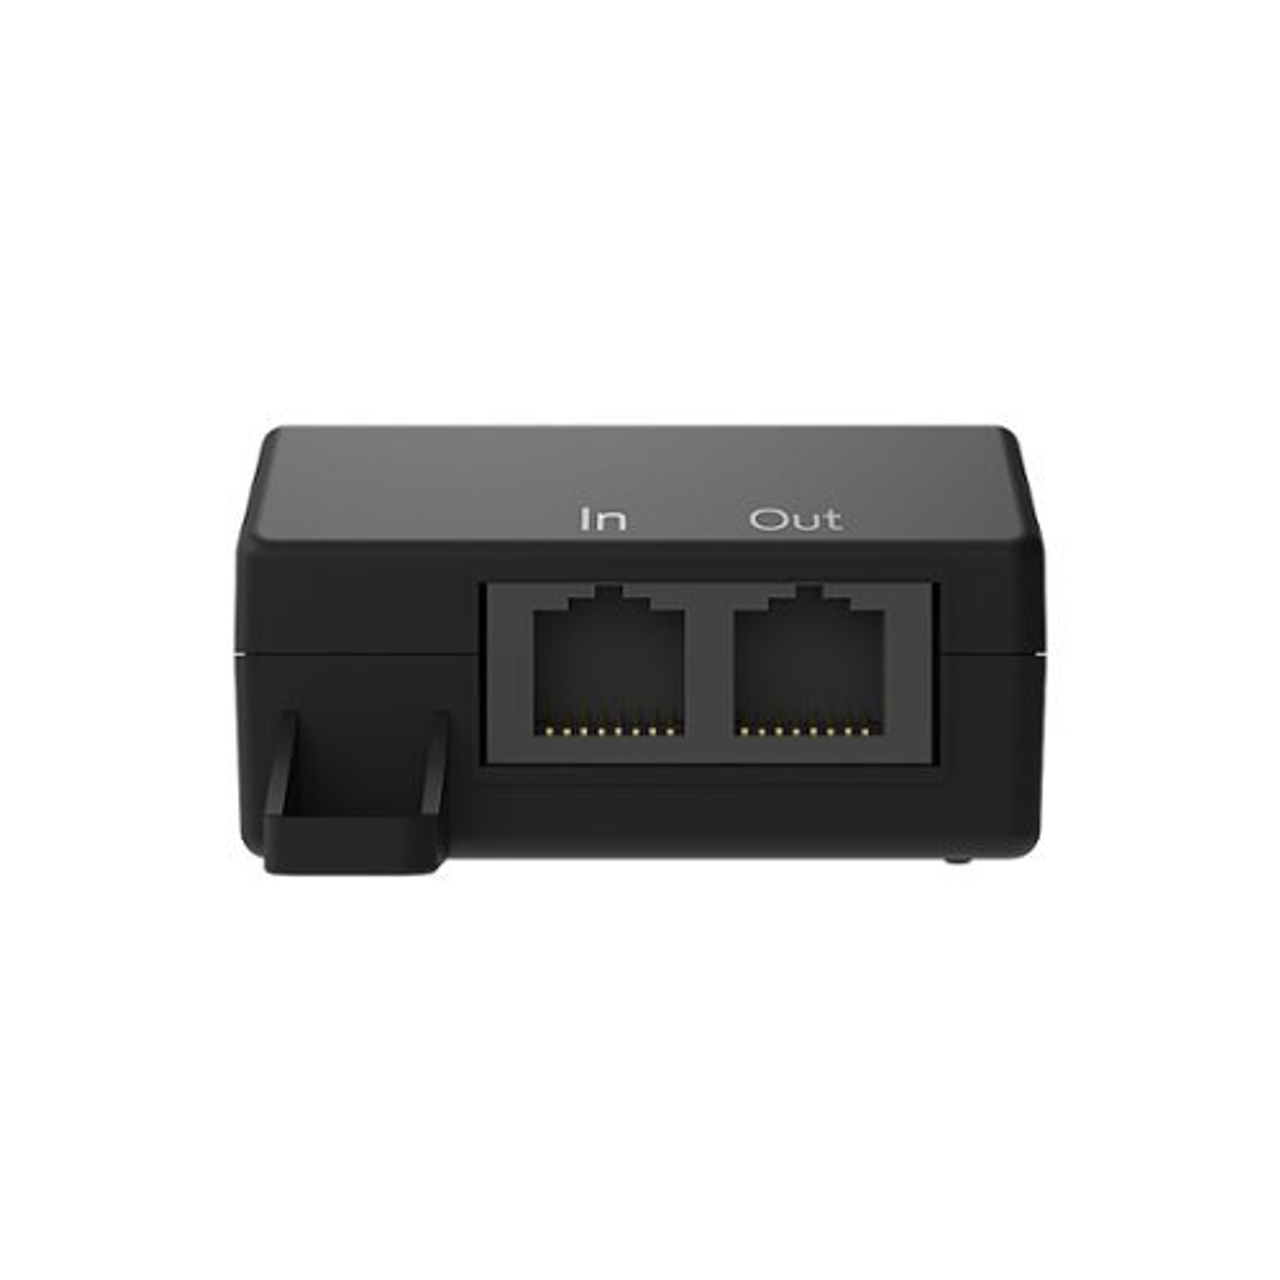 IPORT CONNECT POE+ INJECTOR - Black